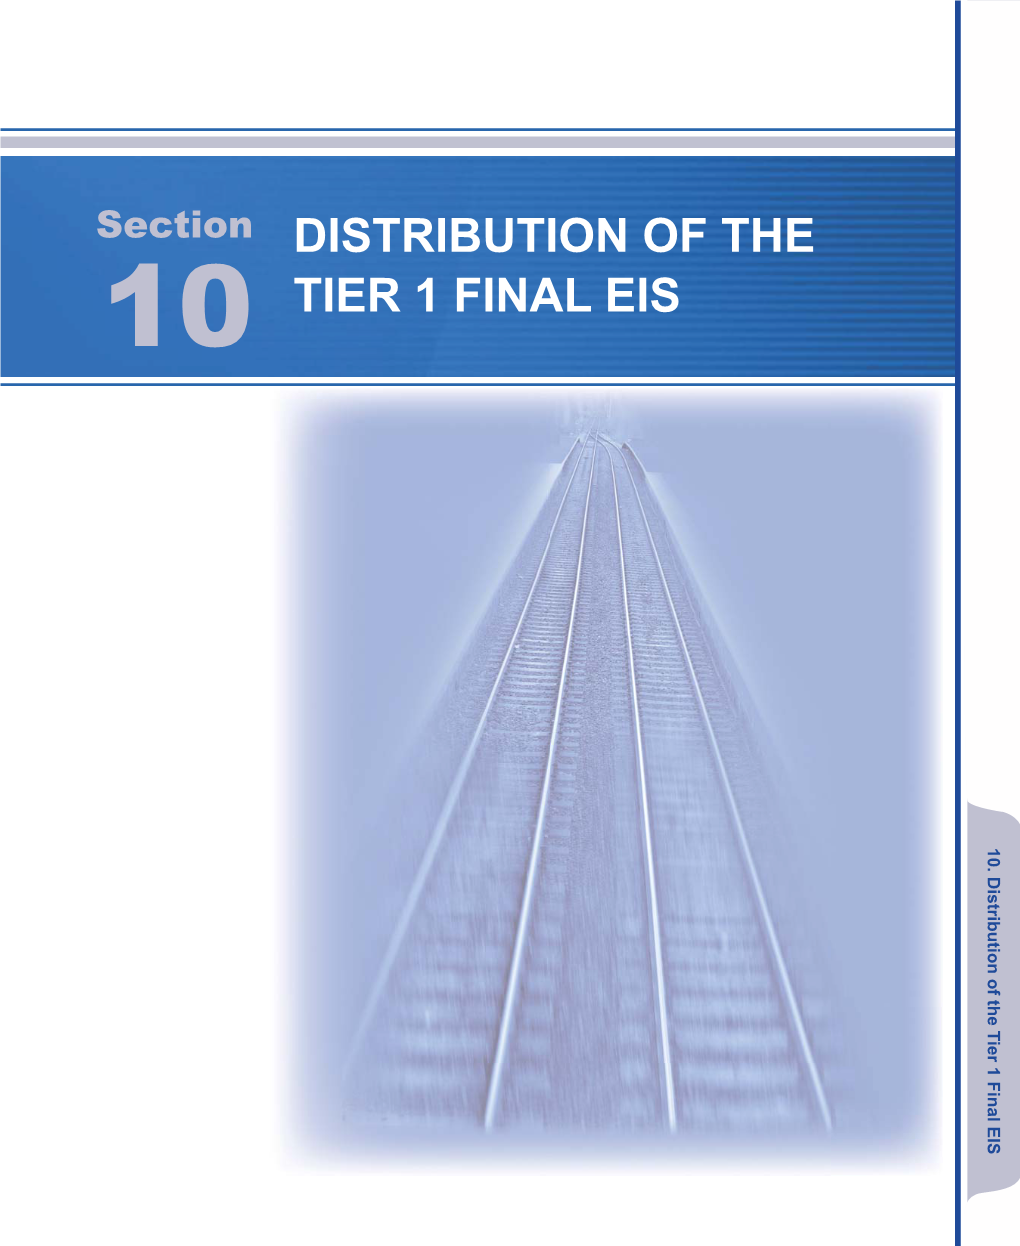 Distribution of the Tier 1 Final